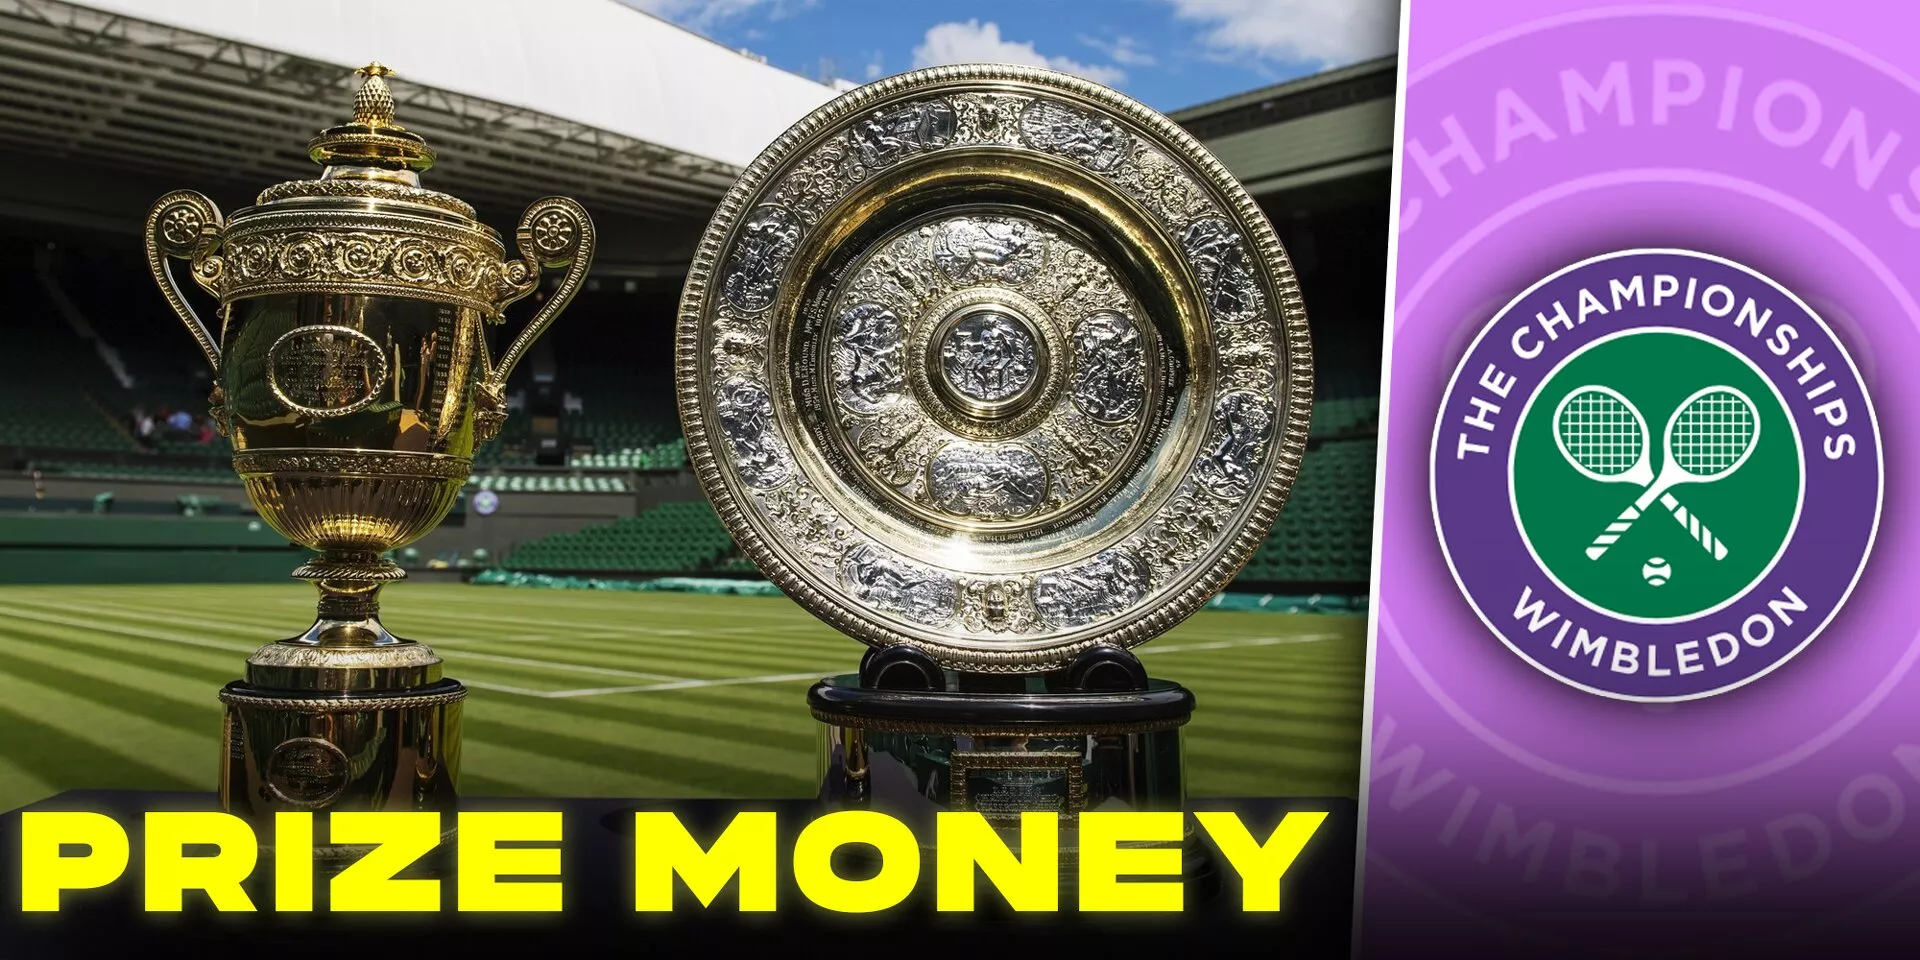 What will be the prize money at Wimbledon 2023?